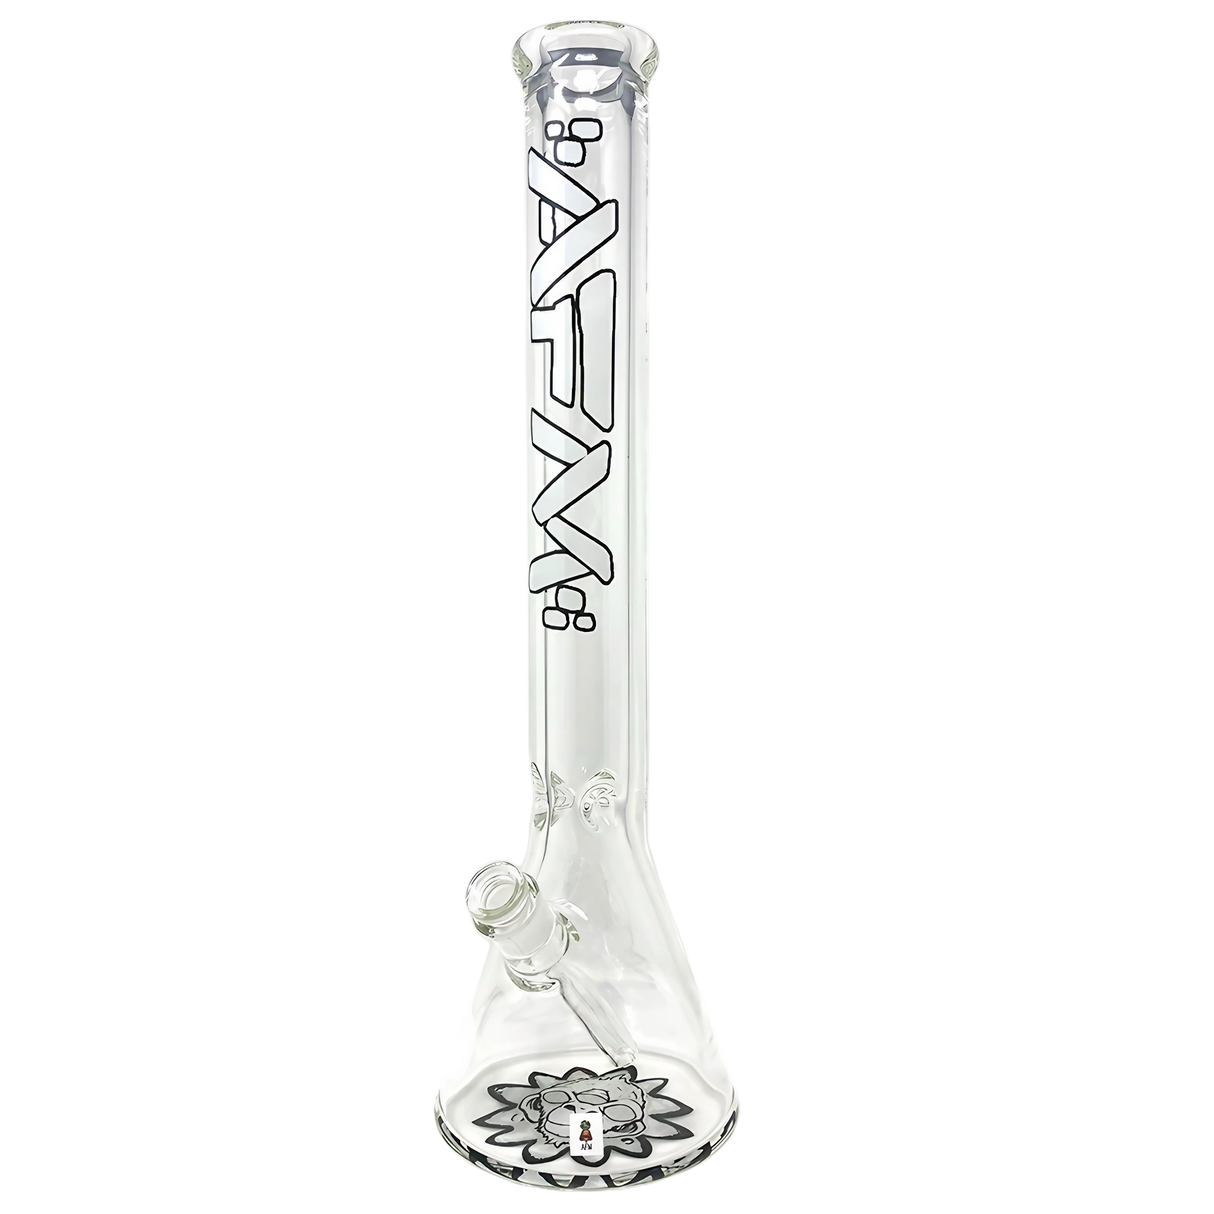 AFM The Flower Monkey 9mm Clear Beaker Bong, 18" Tall with Heavy Wall Glass